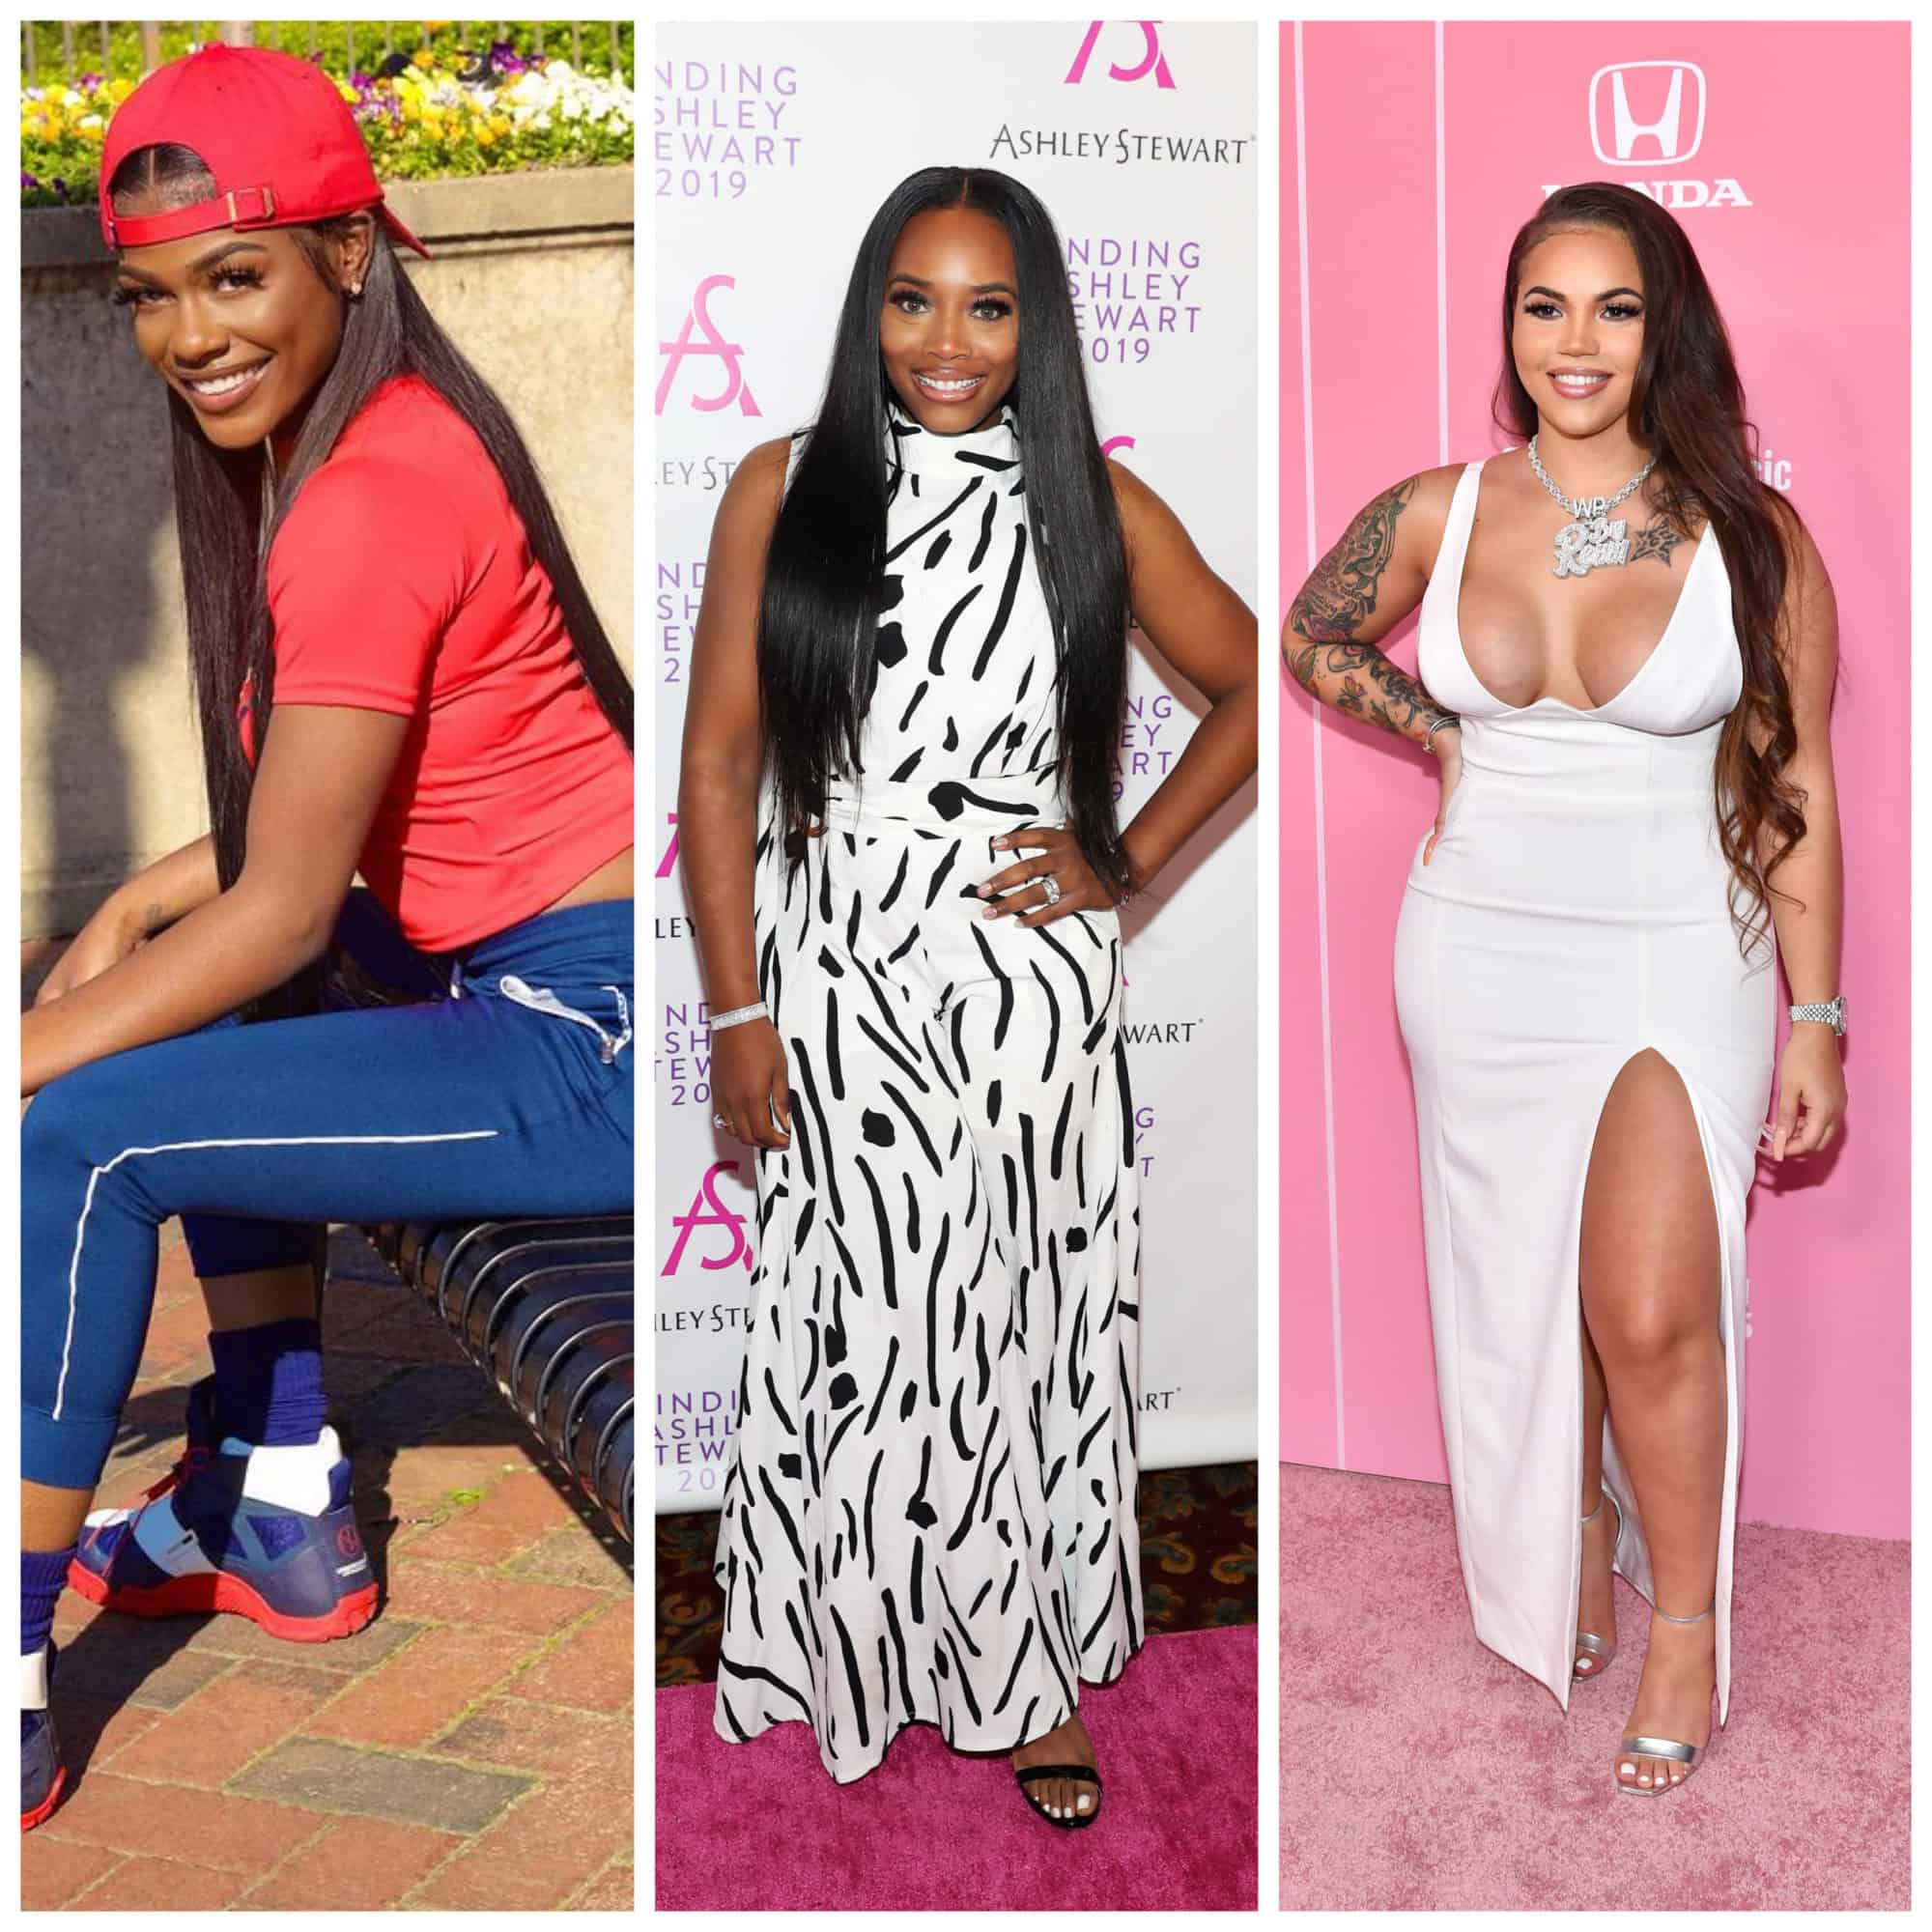 Omeretta, Yandy Harris and Renni Rucci are among the new faces joining the 10th season of "Love & Hip Hop: Atlanta" which premieres July 5th.